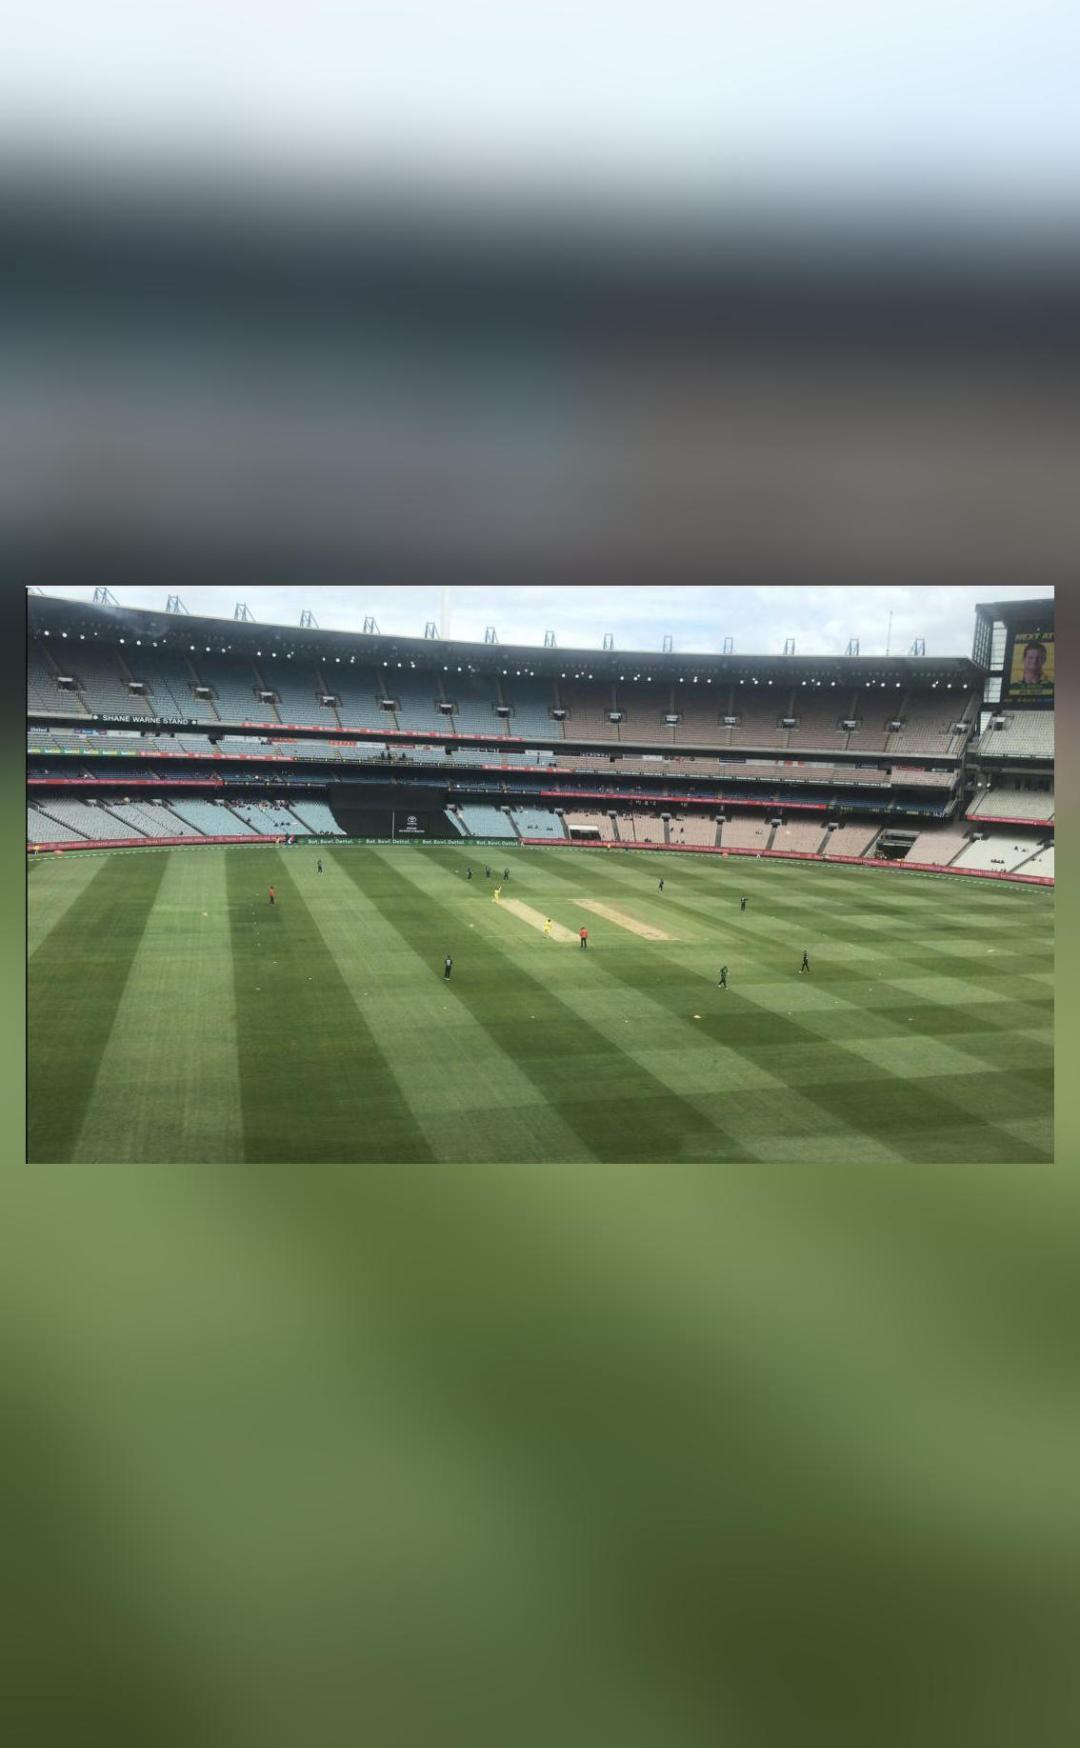 Akhtar reacts to pic of nearly empty stadium during Aus-Eng ODI, says 'Food  for thought'